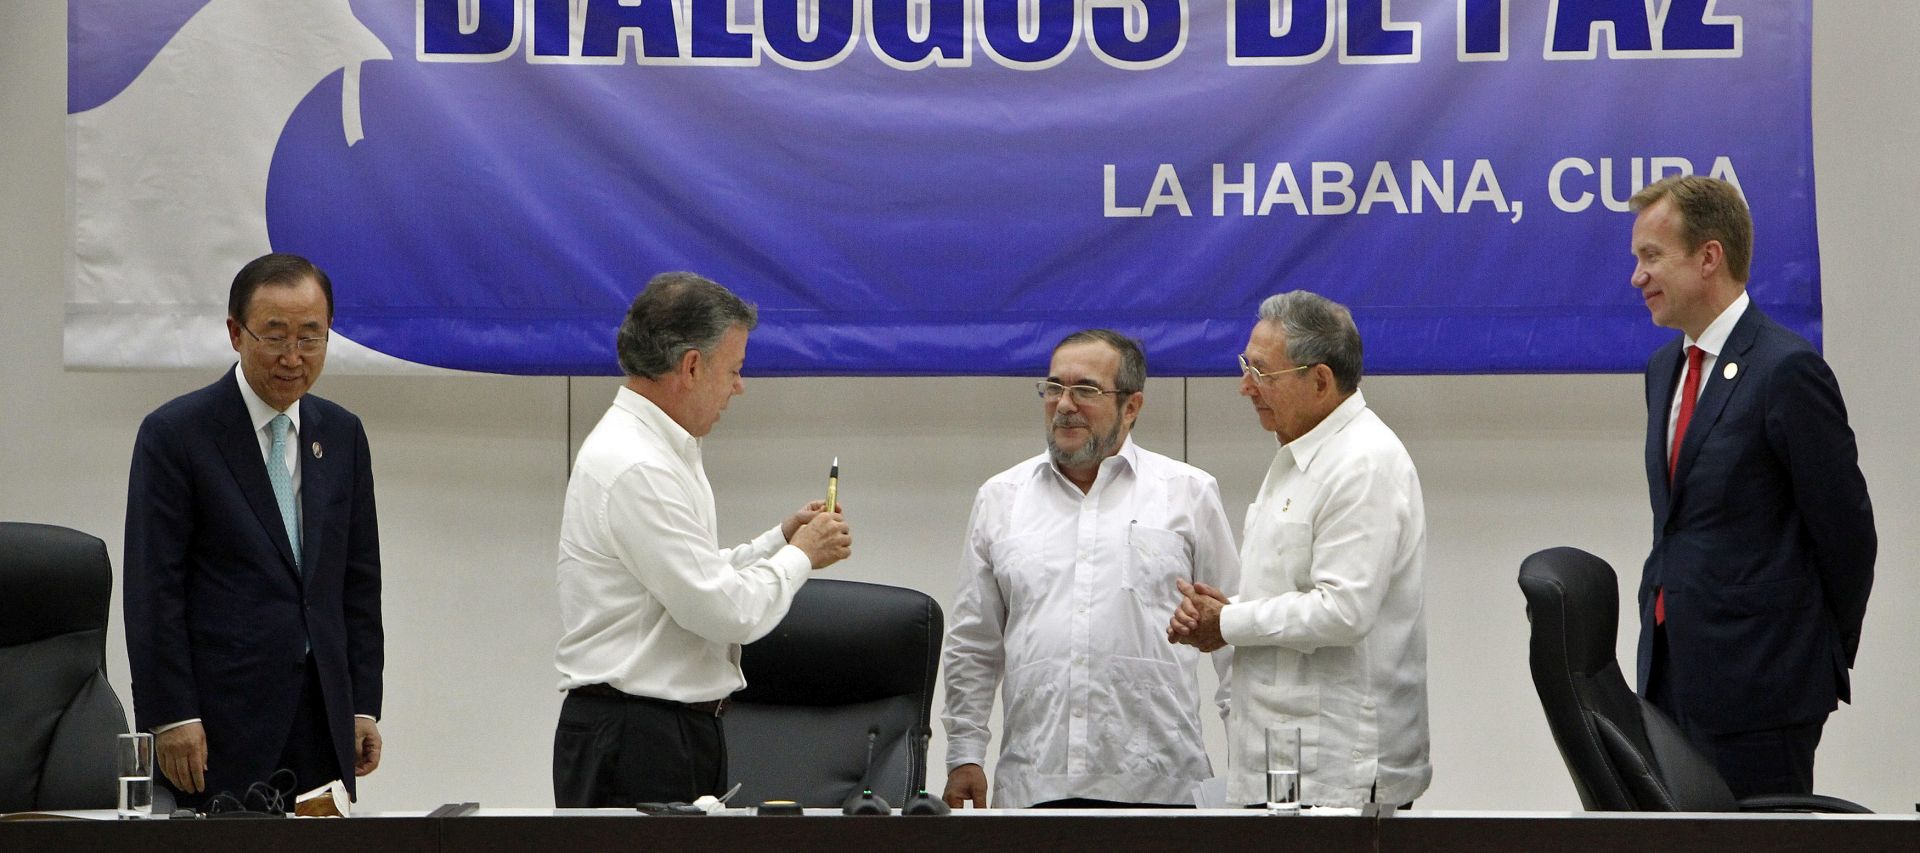 epa05386386 Leader of guerrilla of FARC Londono Echeverri 'Timochenko' (C) talks to Cuban President Raul Castro (2R) and Colombian President Juan Manuel Santos (2L) next to Norwegian Foreign Miniser Borge Brende (R) and UN General Secretary Ban Ki-moon (L) after the signing of the bilateral ceasefire agreement between FARC and Colombian government, in Havana, Cuba, 23 June 2016. Six presidents of the region and the UN Secretary General attended the ceremony to make official the bilateral ceasefire after 50 years of conflict.  EPA/ERNESTO MASTRASCUSA